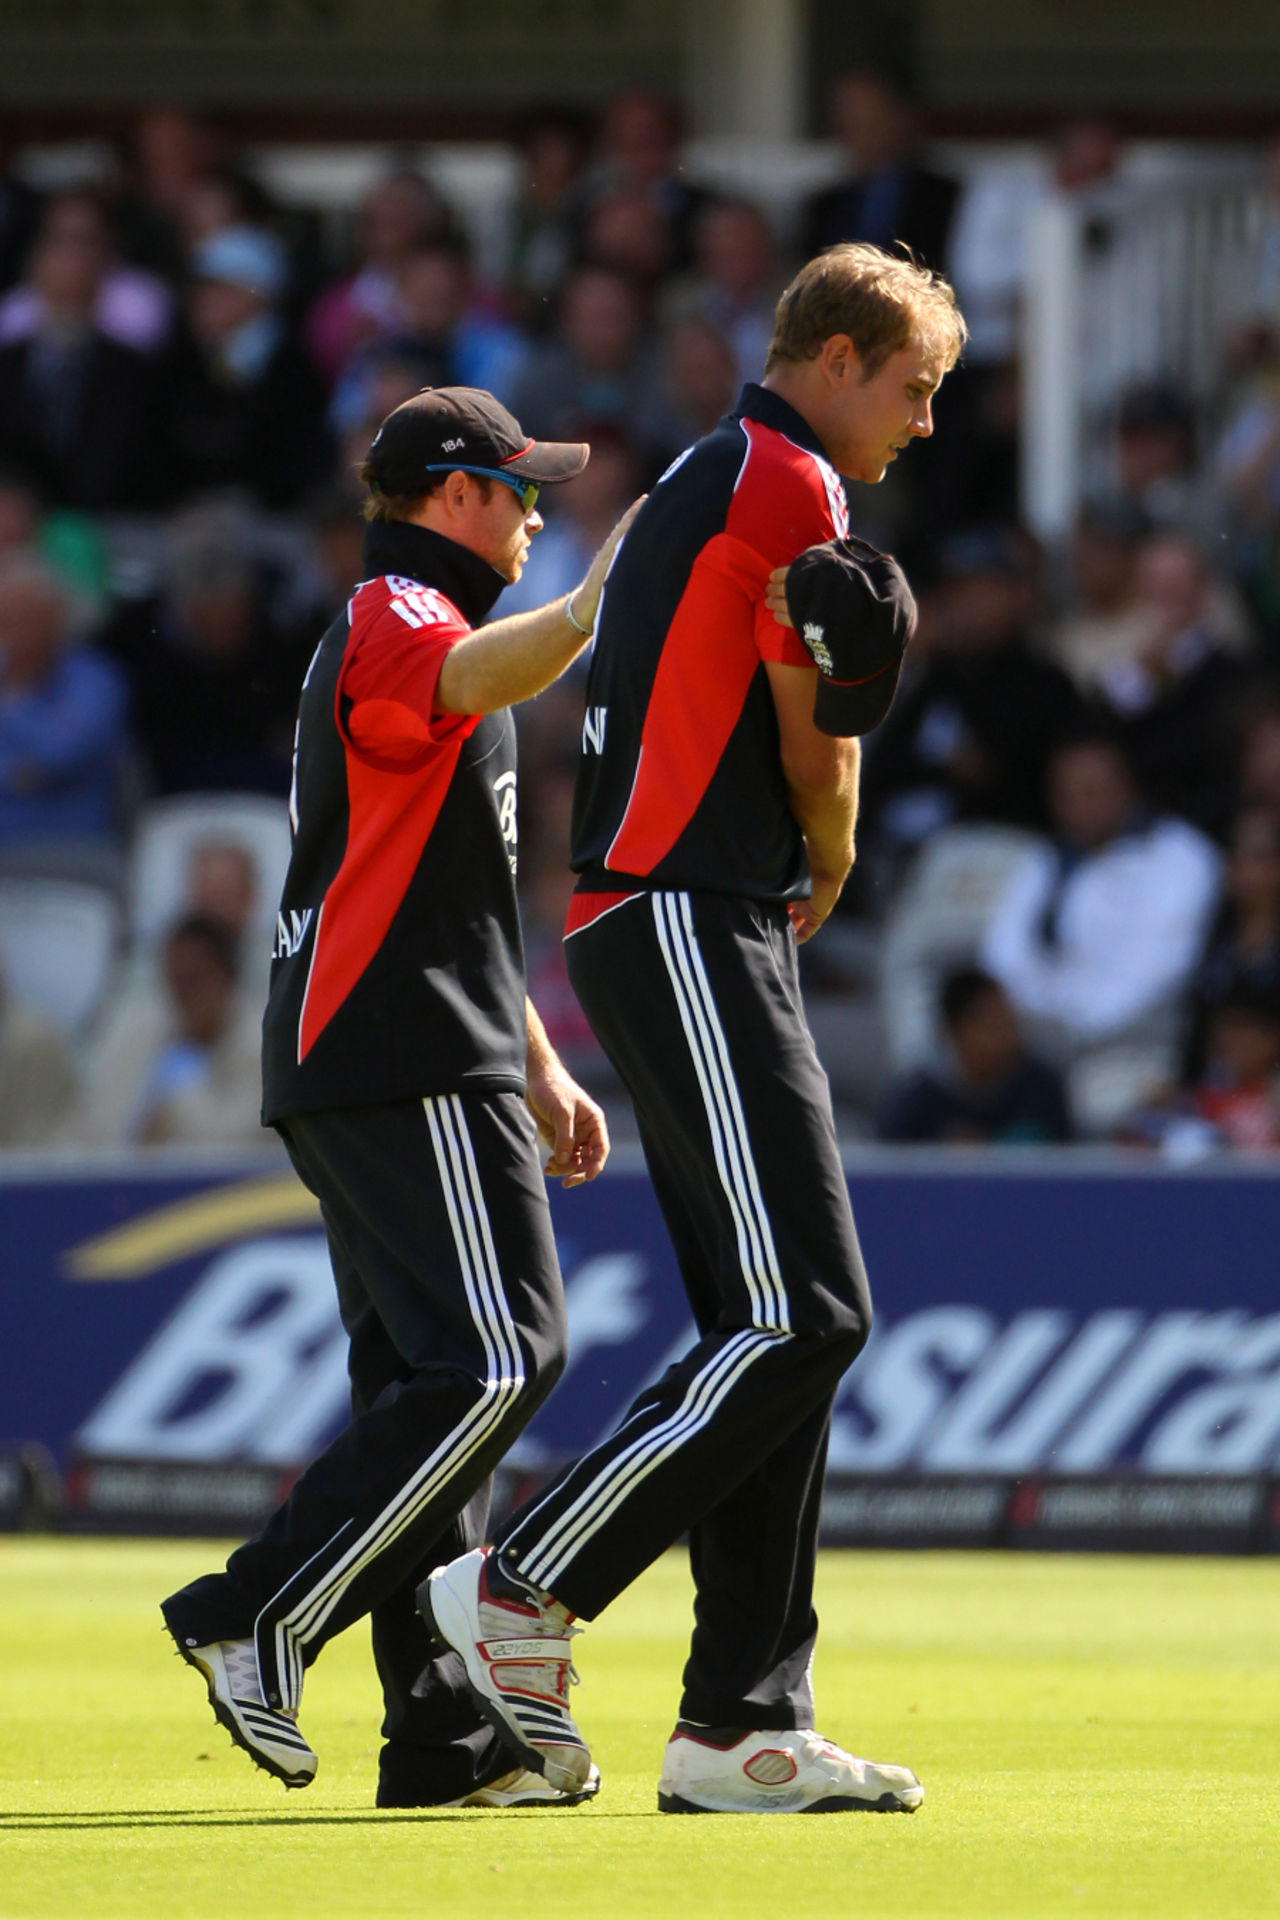 Stuart Broad leaves the field after injuring his arm, England v India, 4th ODI, Lord's, September 11, 2011